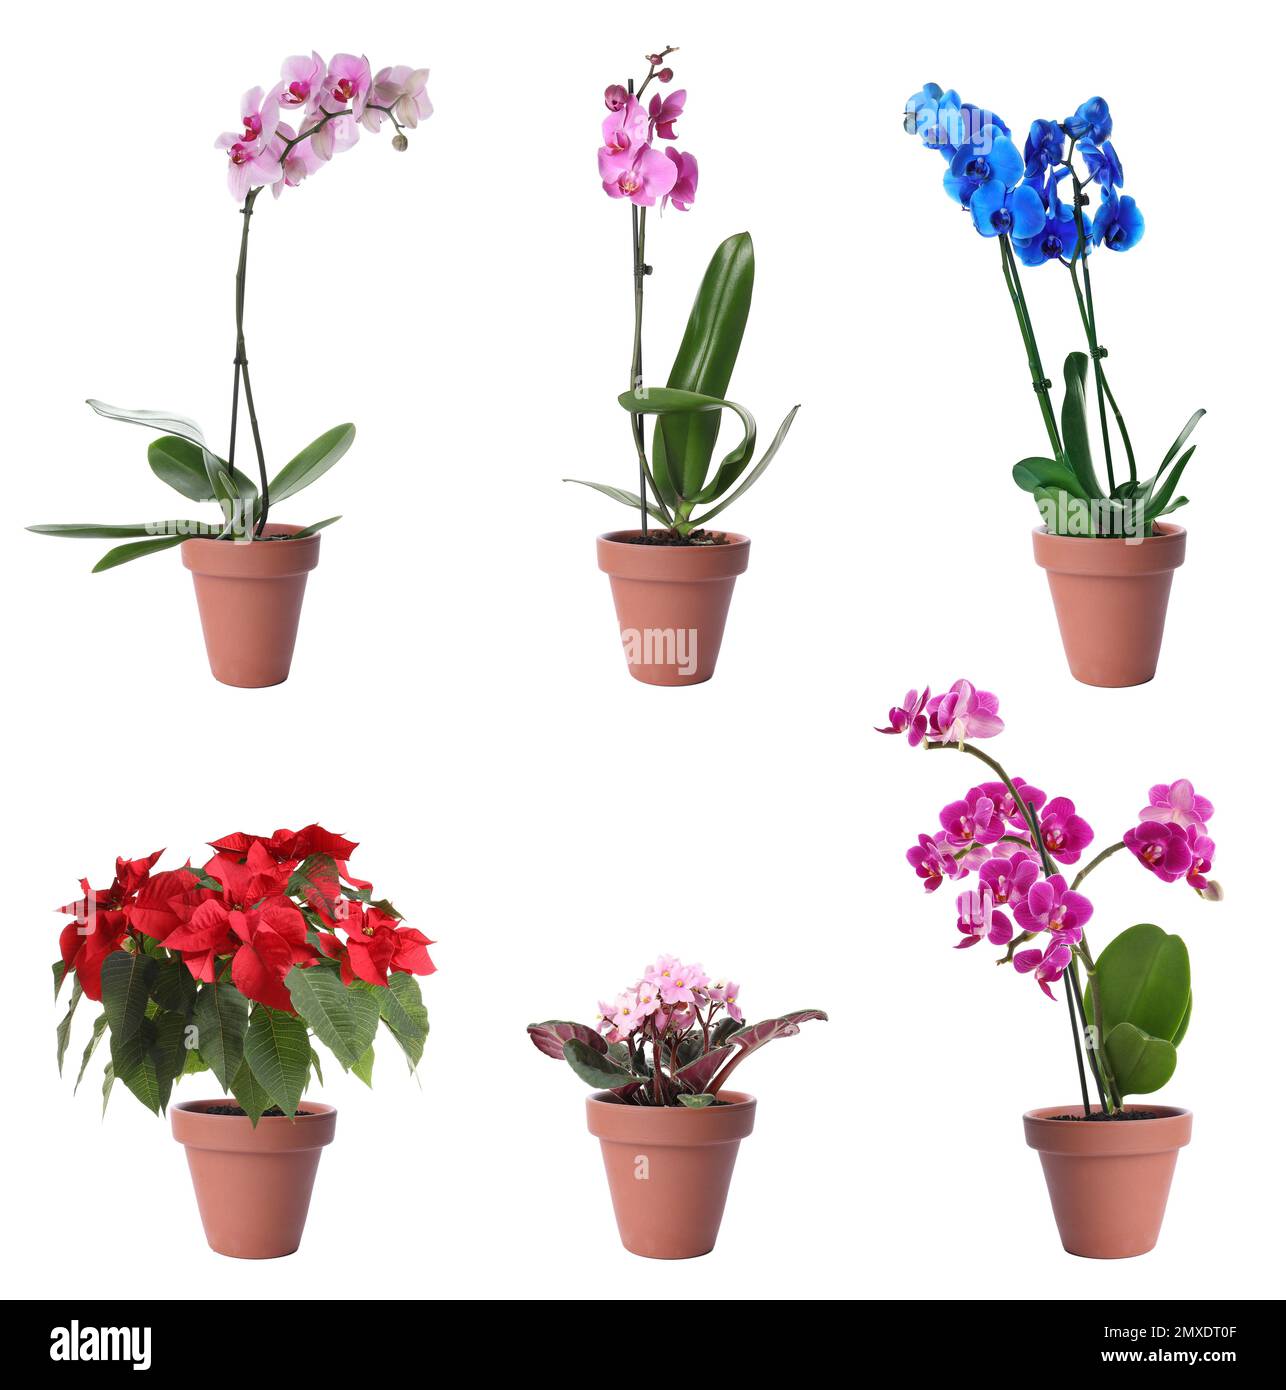 Set of blooming plants in flower pots on white background Stock Photo